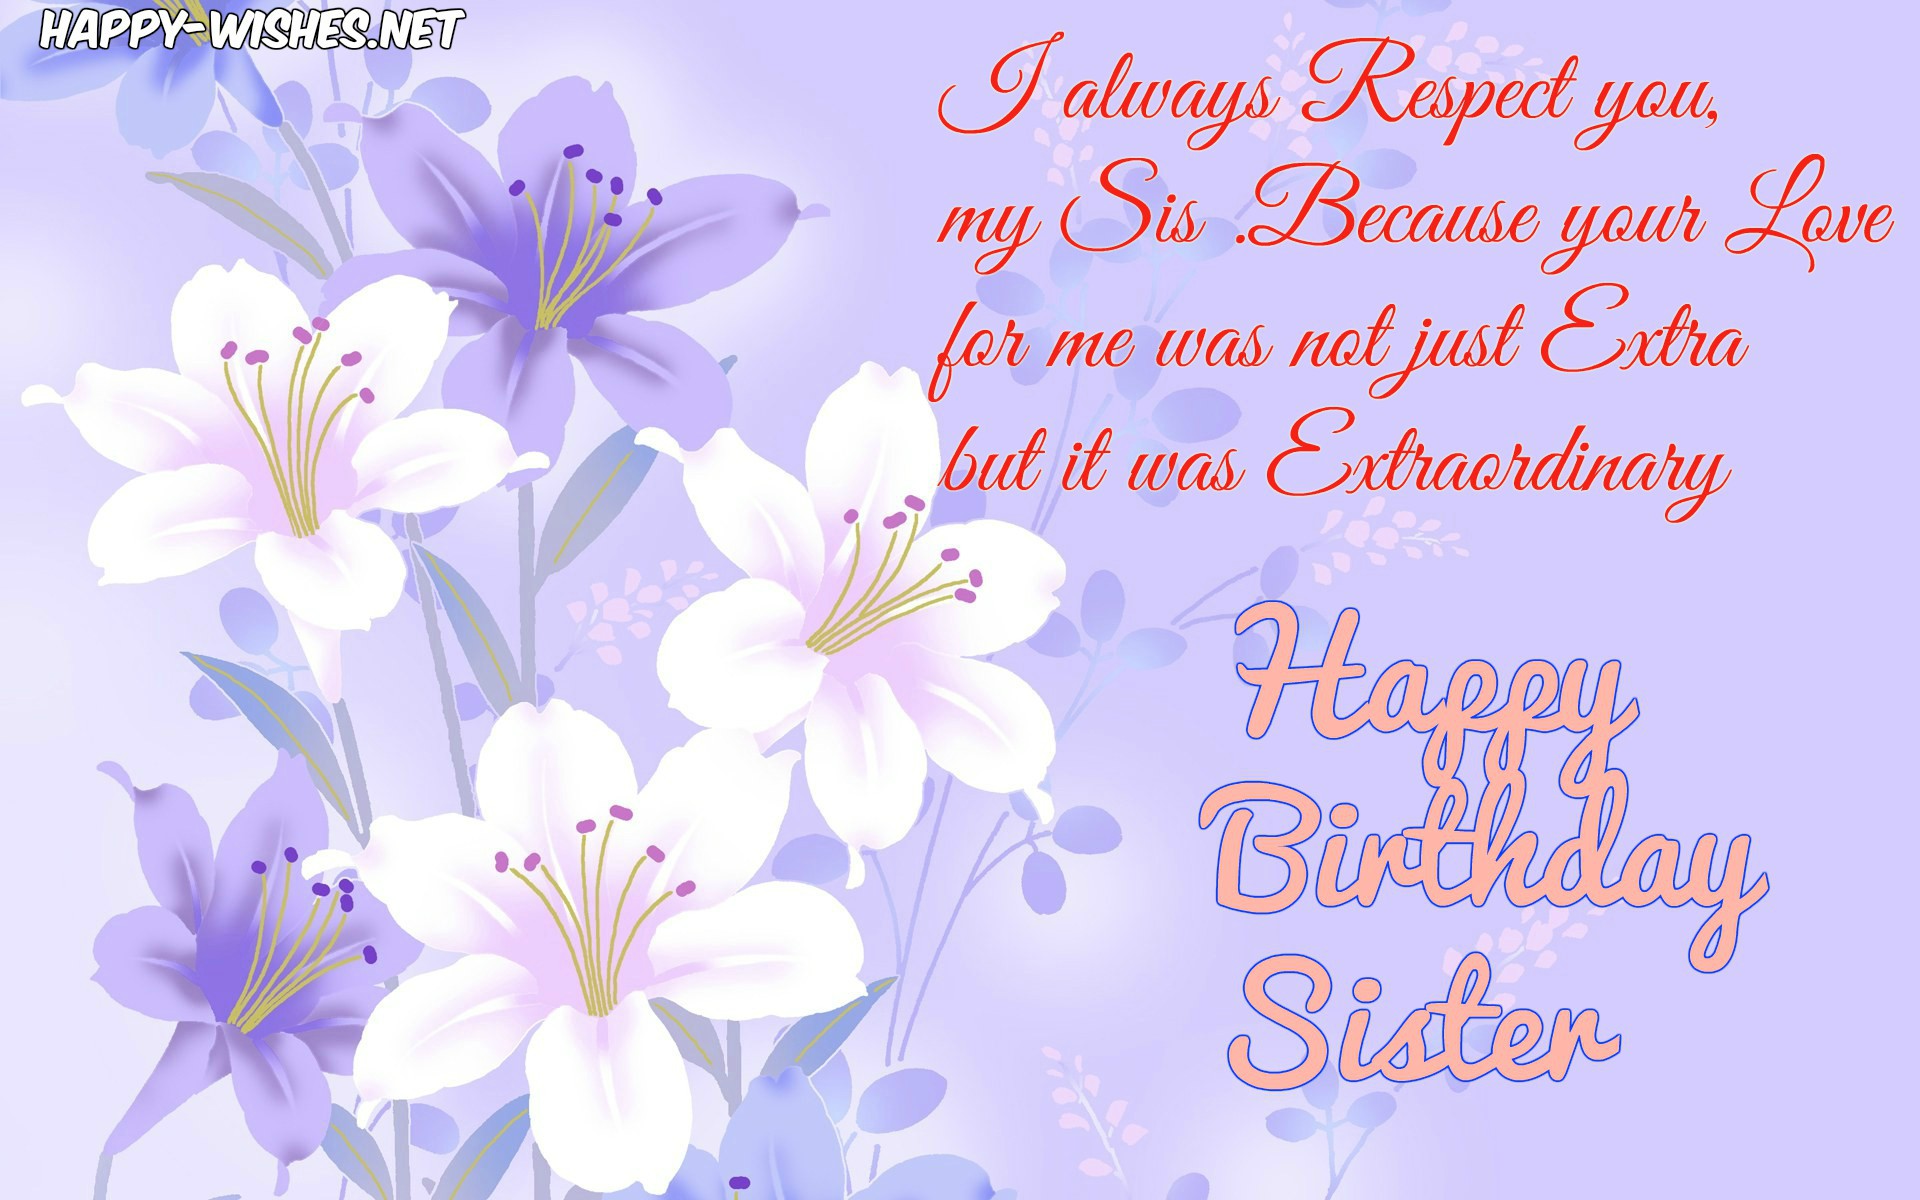 Happy Birthday Wishes For Sister - Quotes, images and Memes